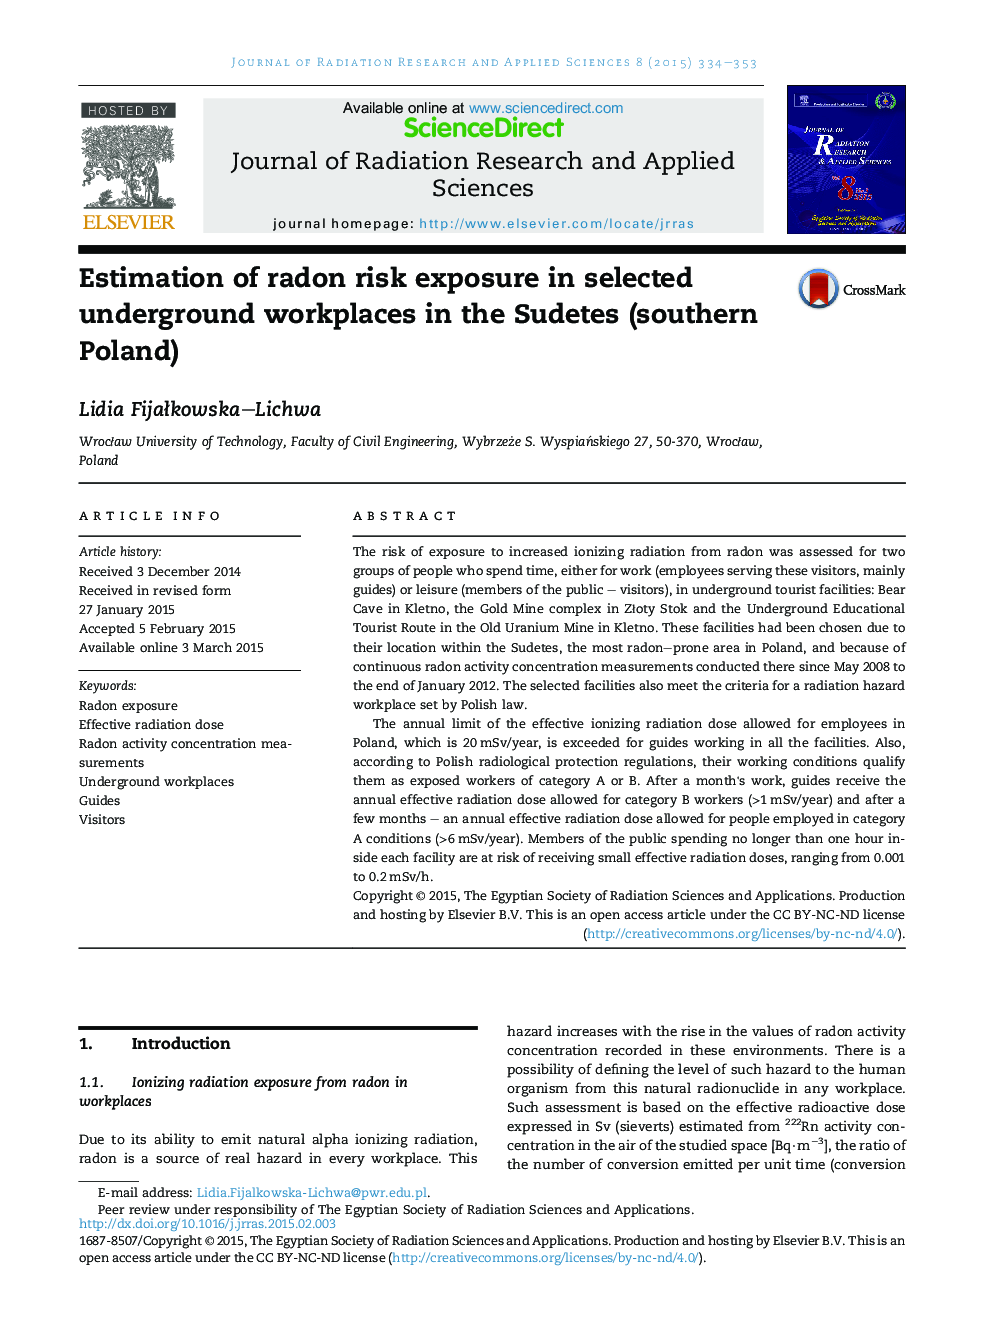 Estimation of radon risk exposure in selected underground workplaces in the Sudetes (southern Poland) 